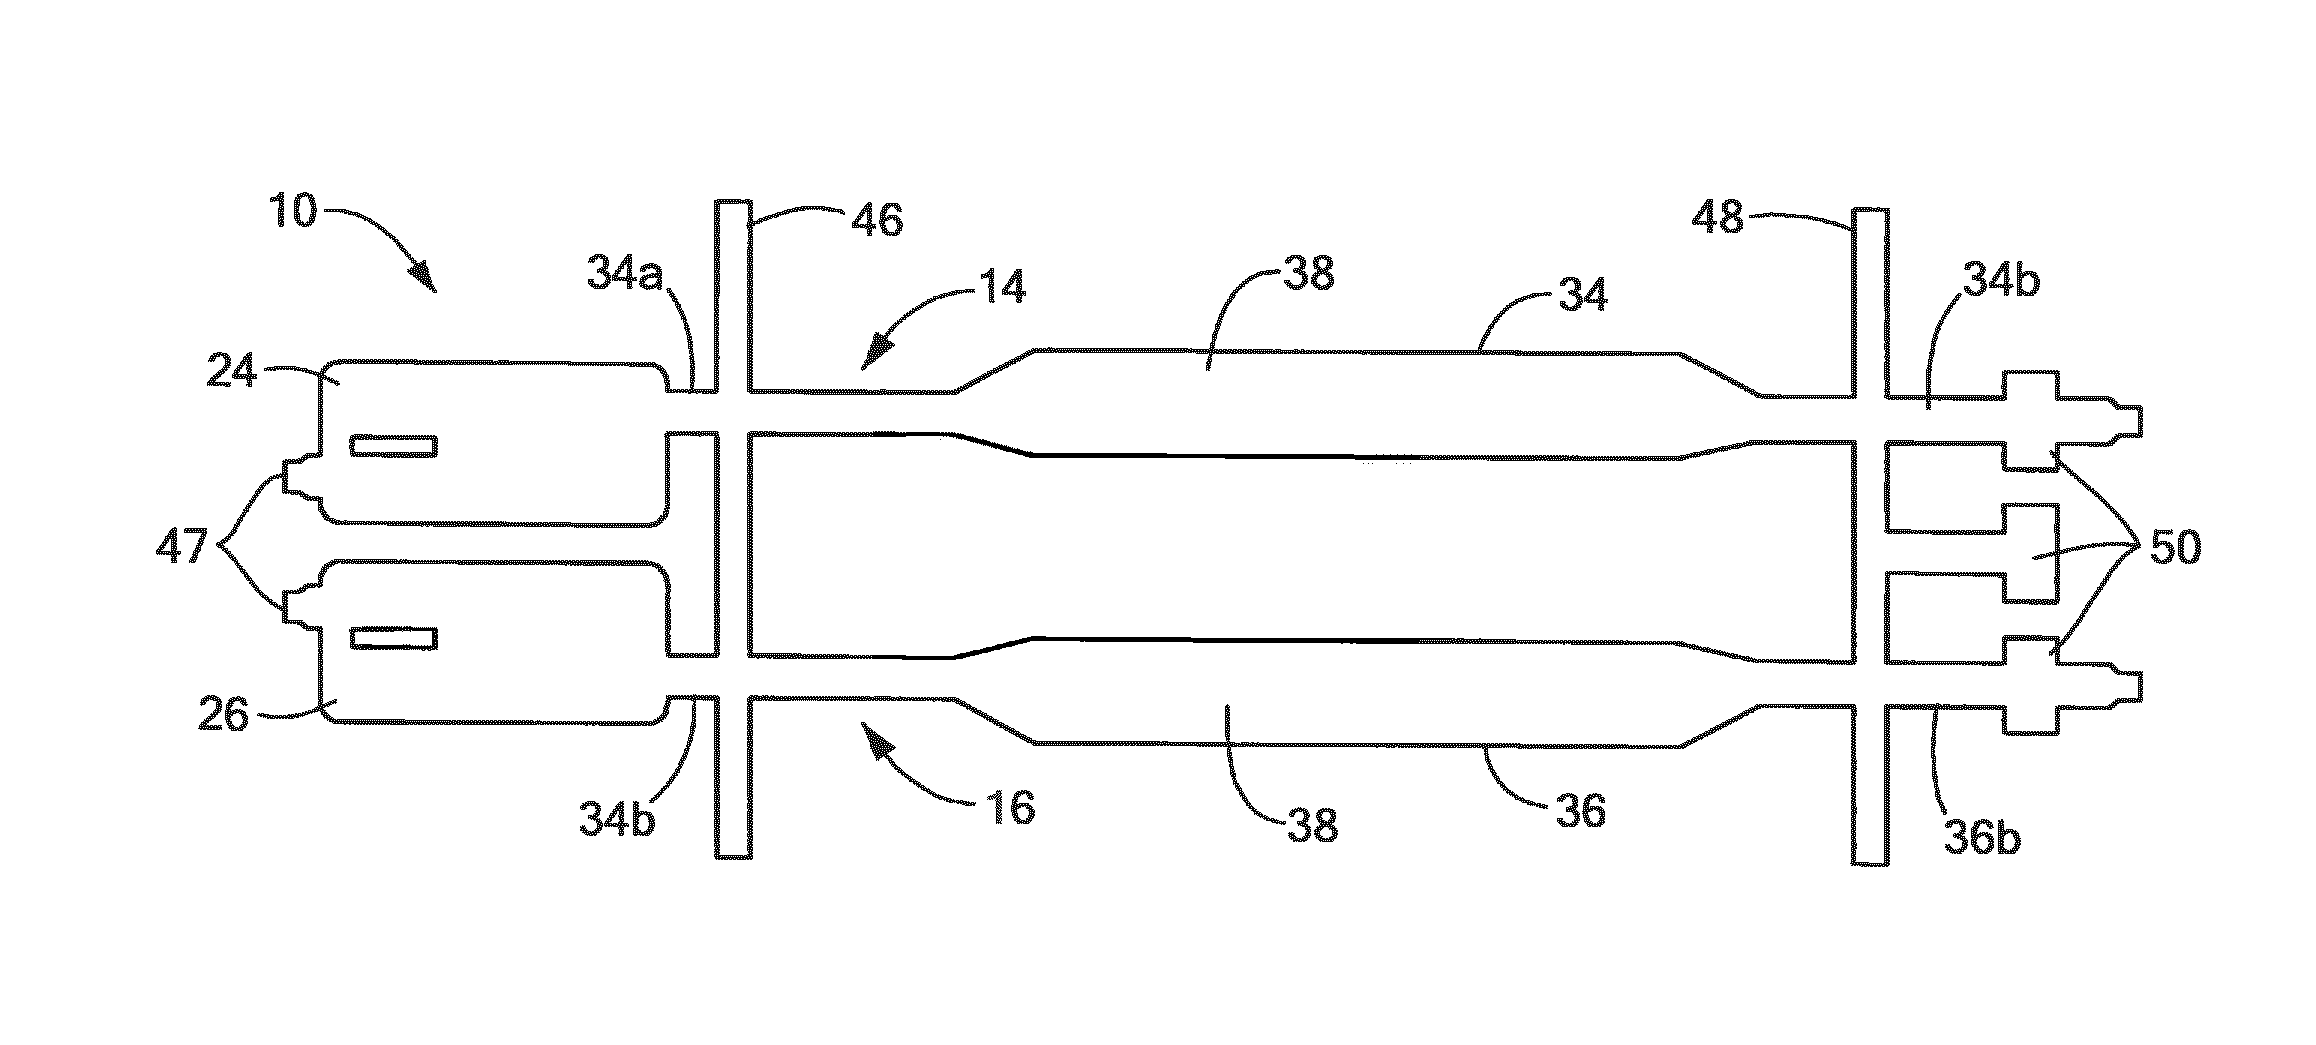 Integrated circuit package having a split lead frame